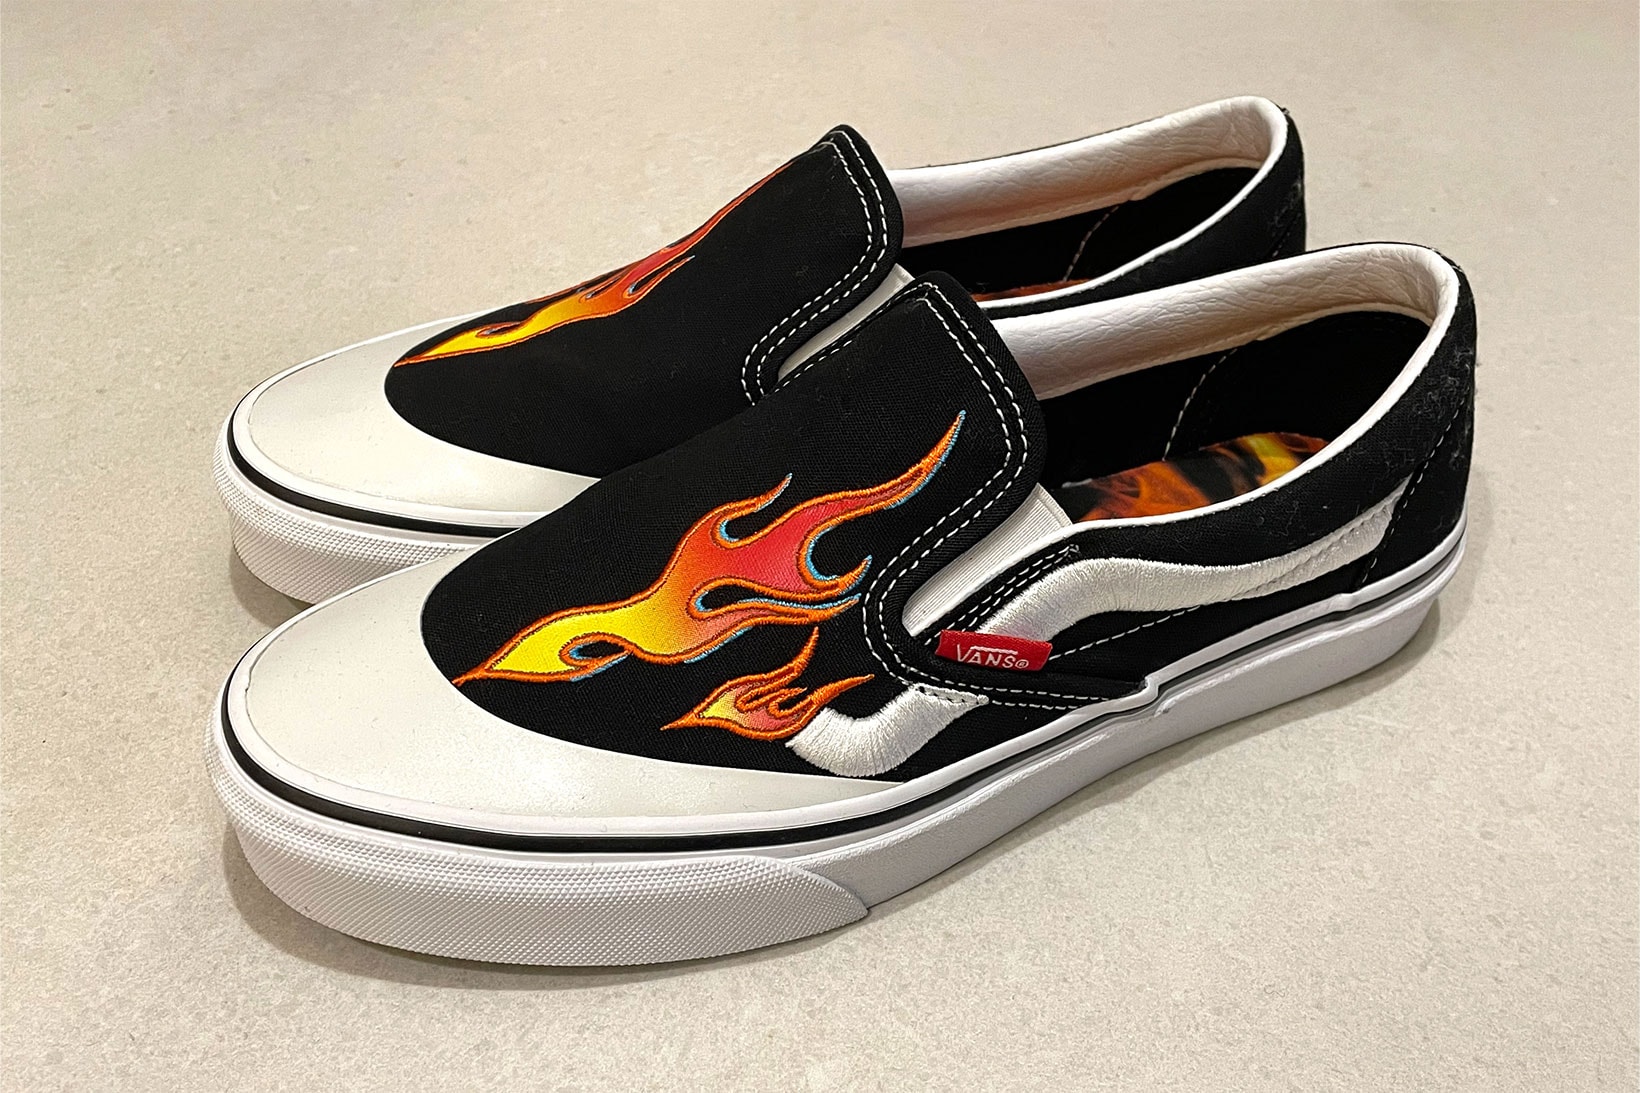 Vans PacSun ASAP Rocky Third Collaboration Slip On Sneakers